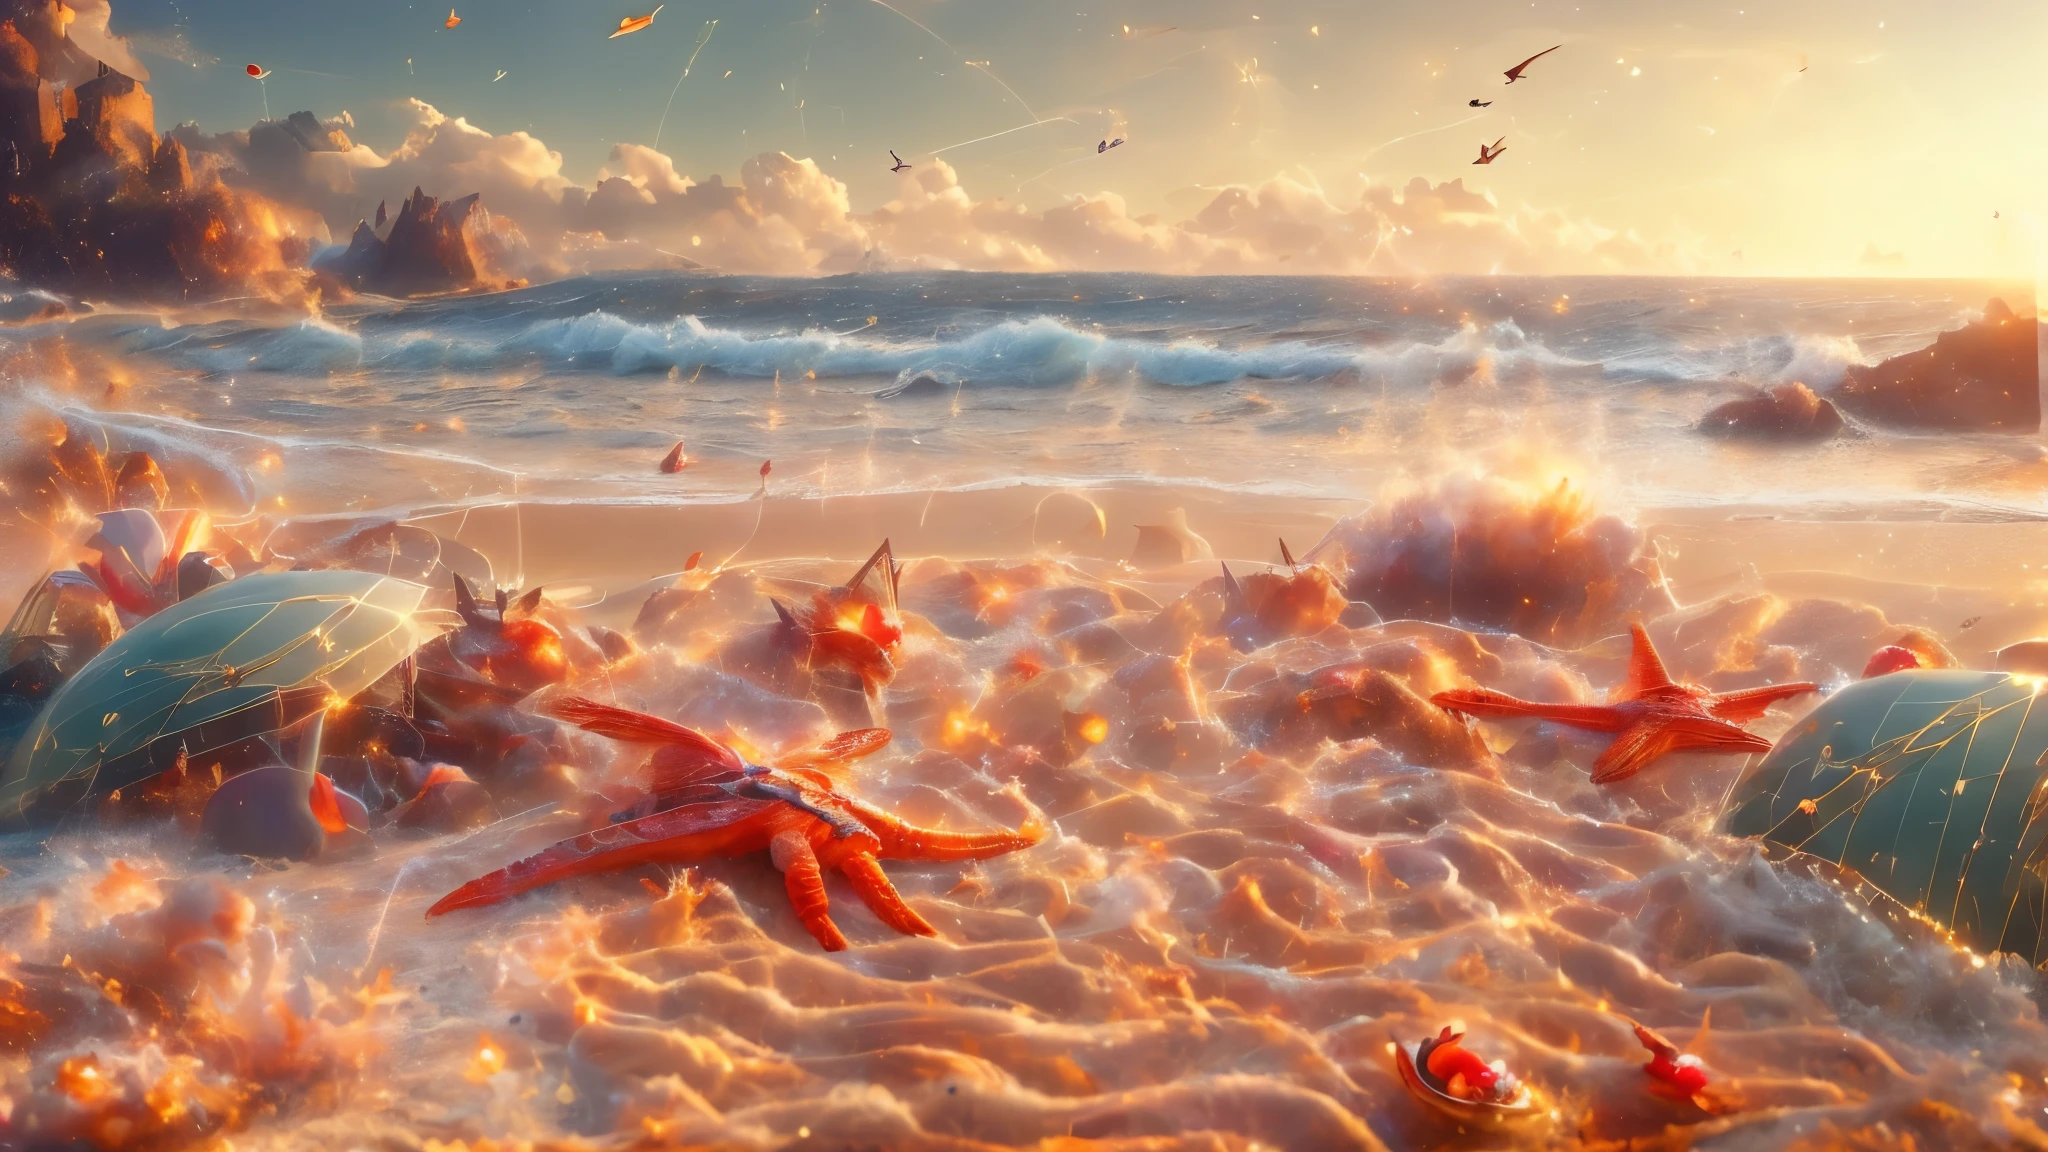 Masterpiece, best quality, 8k, panoramic view, magical scenery, outdoors, day, Beach, Sand that looks like a golden carpet. Sky, cloud, day, without humans, soft sound, waves, Starfish, chatty crabs, noisy seagulls, which filled the environment with their animation.